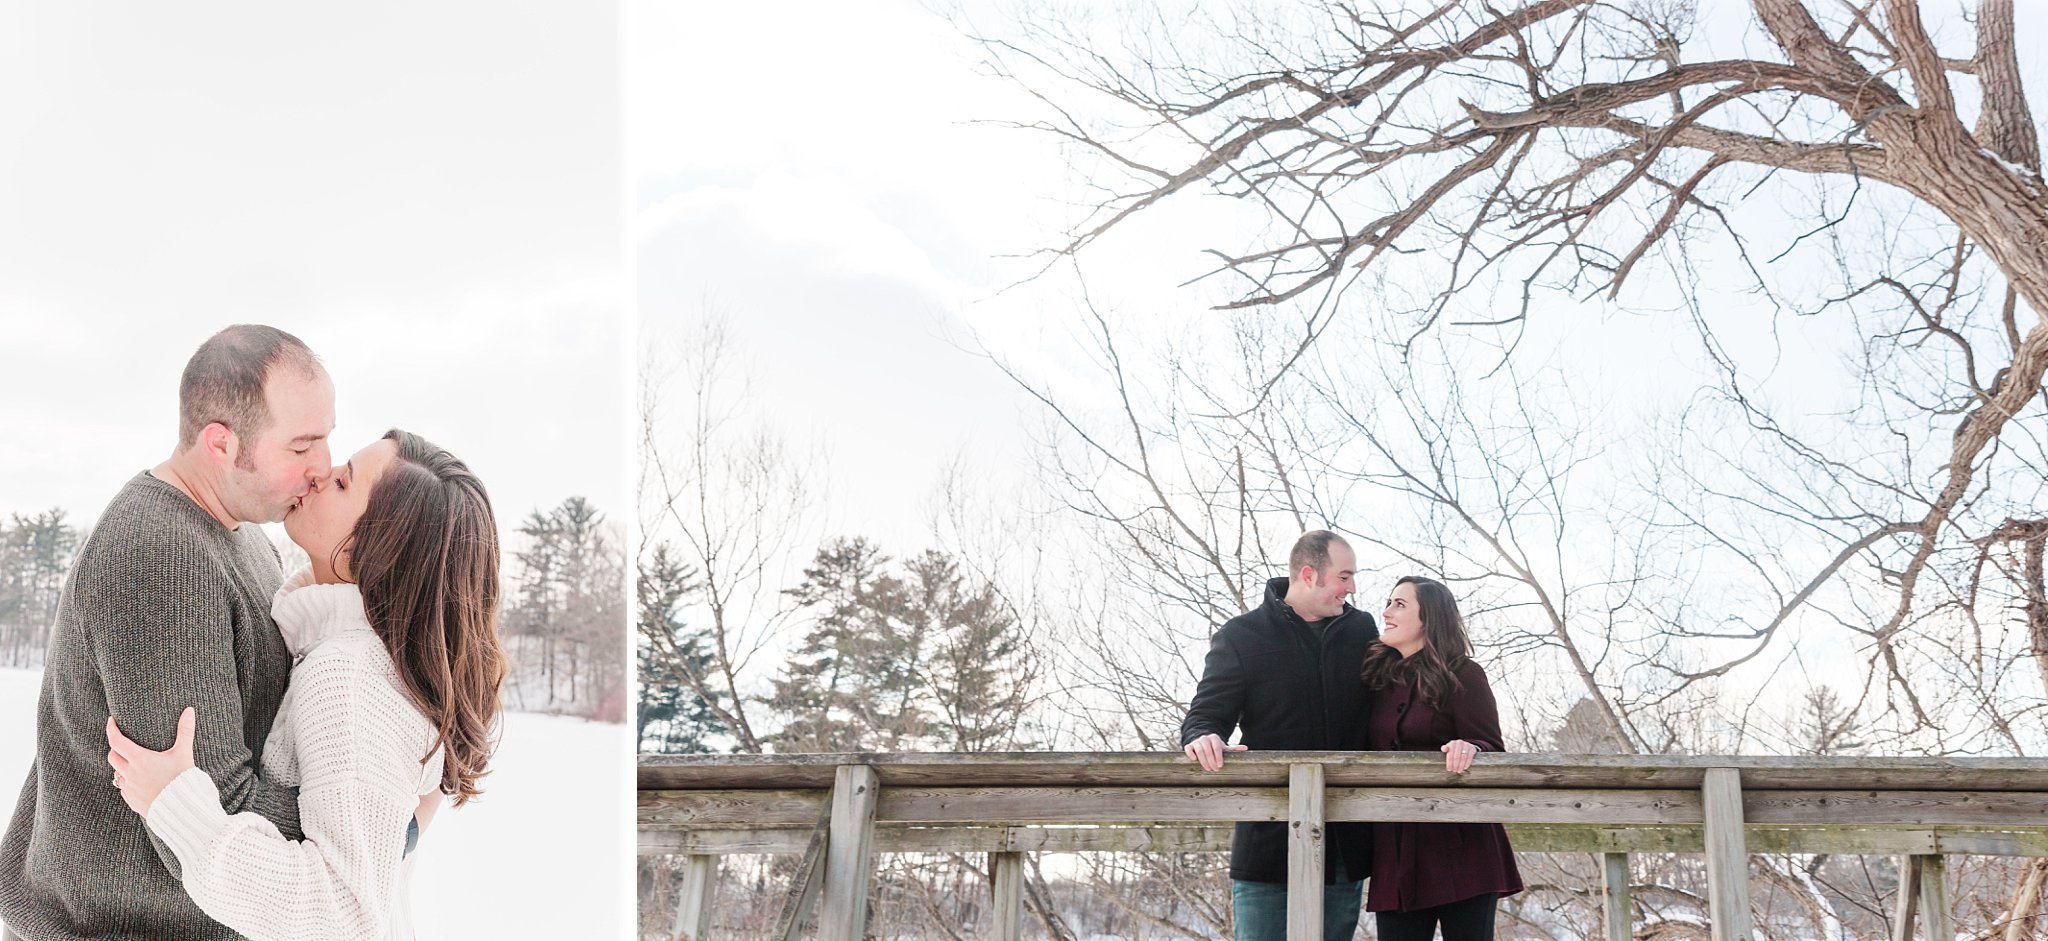 a couple kisses, and a second photo of a couple standing on a wooden bridge, looking at each other and smiling